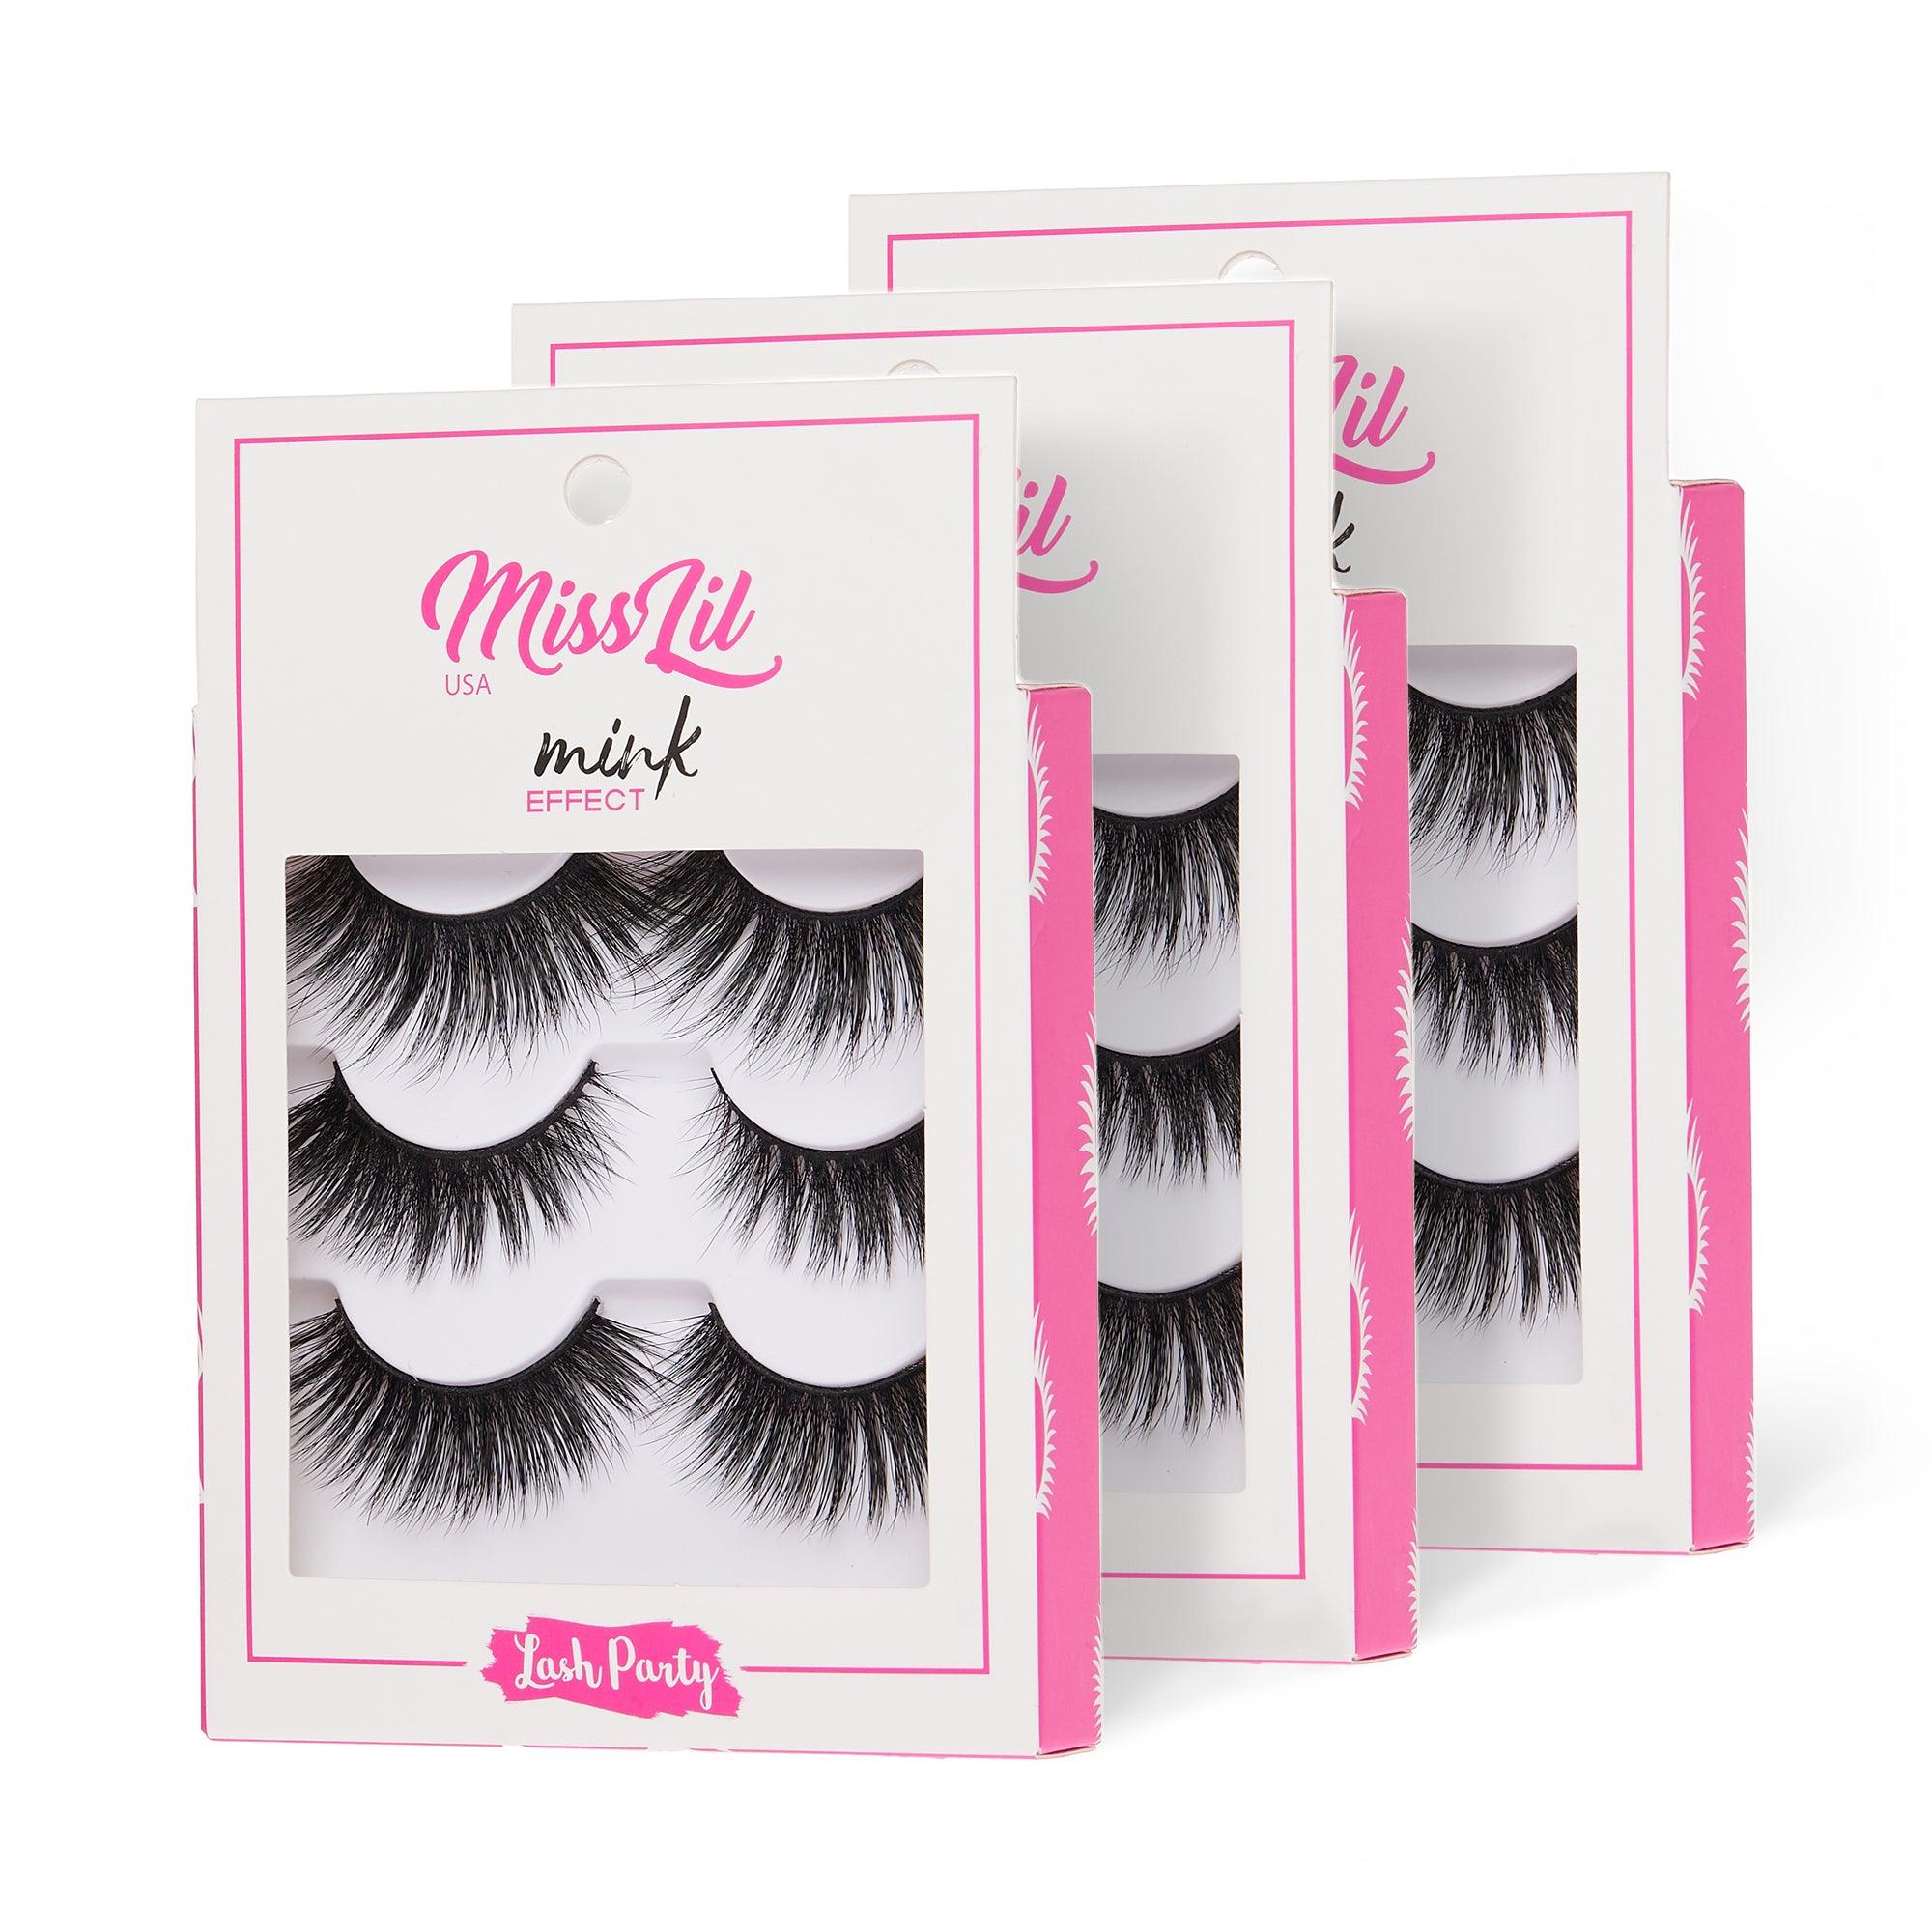 3-Pair Faux Mink Effect Eyelashes - Lash Party Collection #14 - Pack of 3 - Miss Lil USA